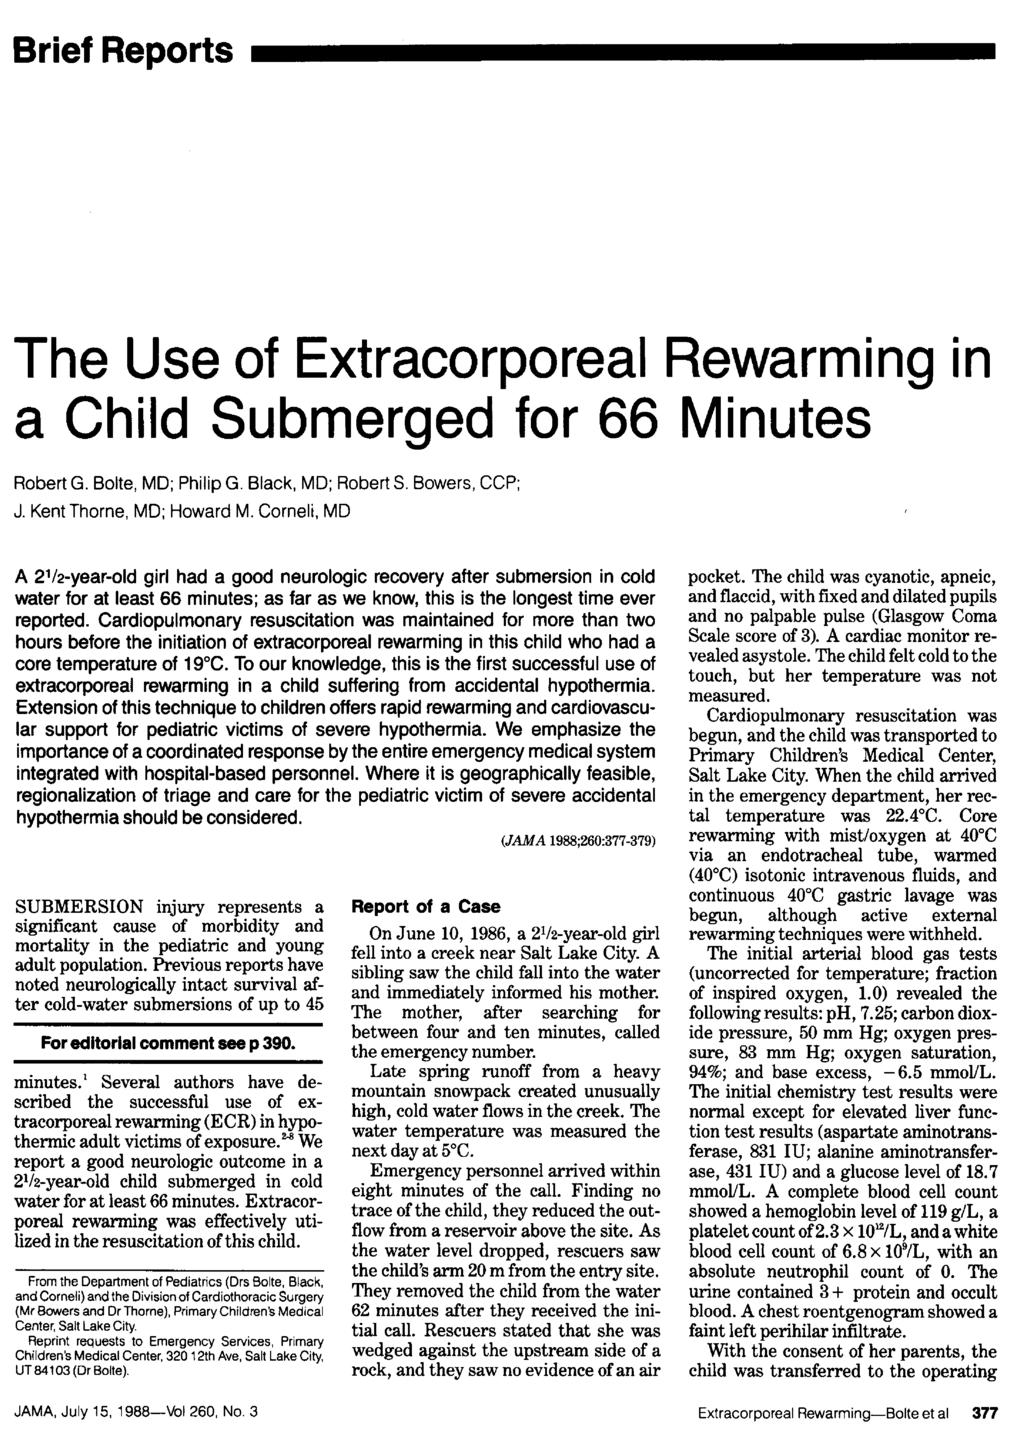 Page 5 The Use of Extracorporeal Rewarming in a Child Submerged for 66 Minutes Robert G. Bolte, MD; Philip G. Black, MD; Robert S. Bowers, CCP; J. Kent Thorne, MD; Howard M.